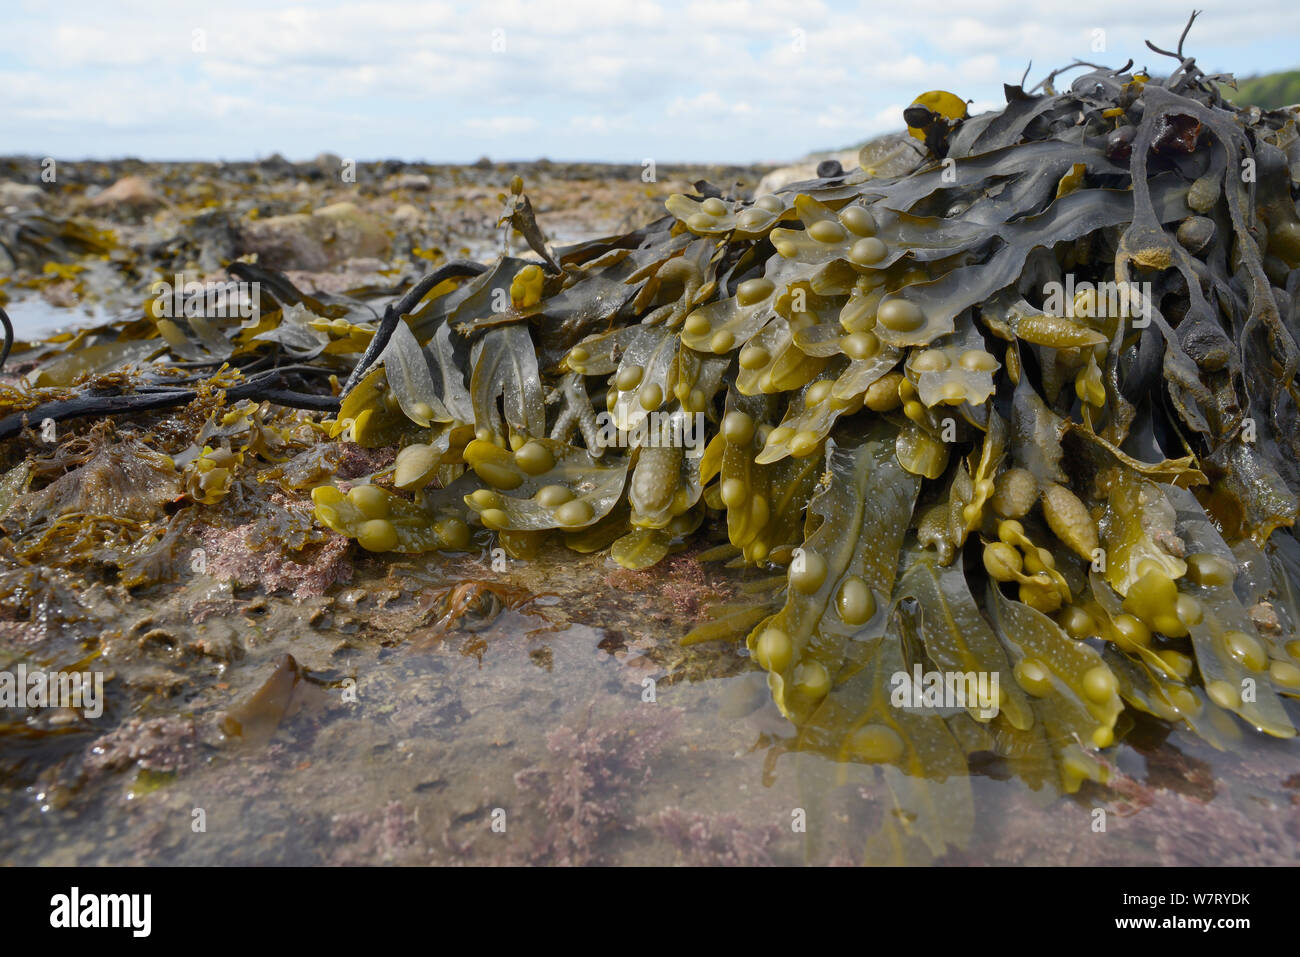 Bladder wrack (Fucus vesiculosus) with many air bladders growing low on a rocky shore, Lyme Regis, Dorset, UK, May. Stock Photo